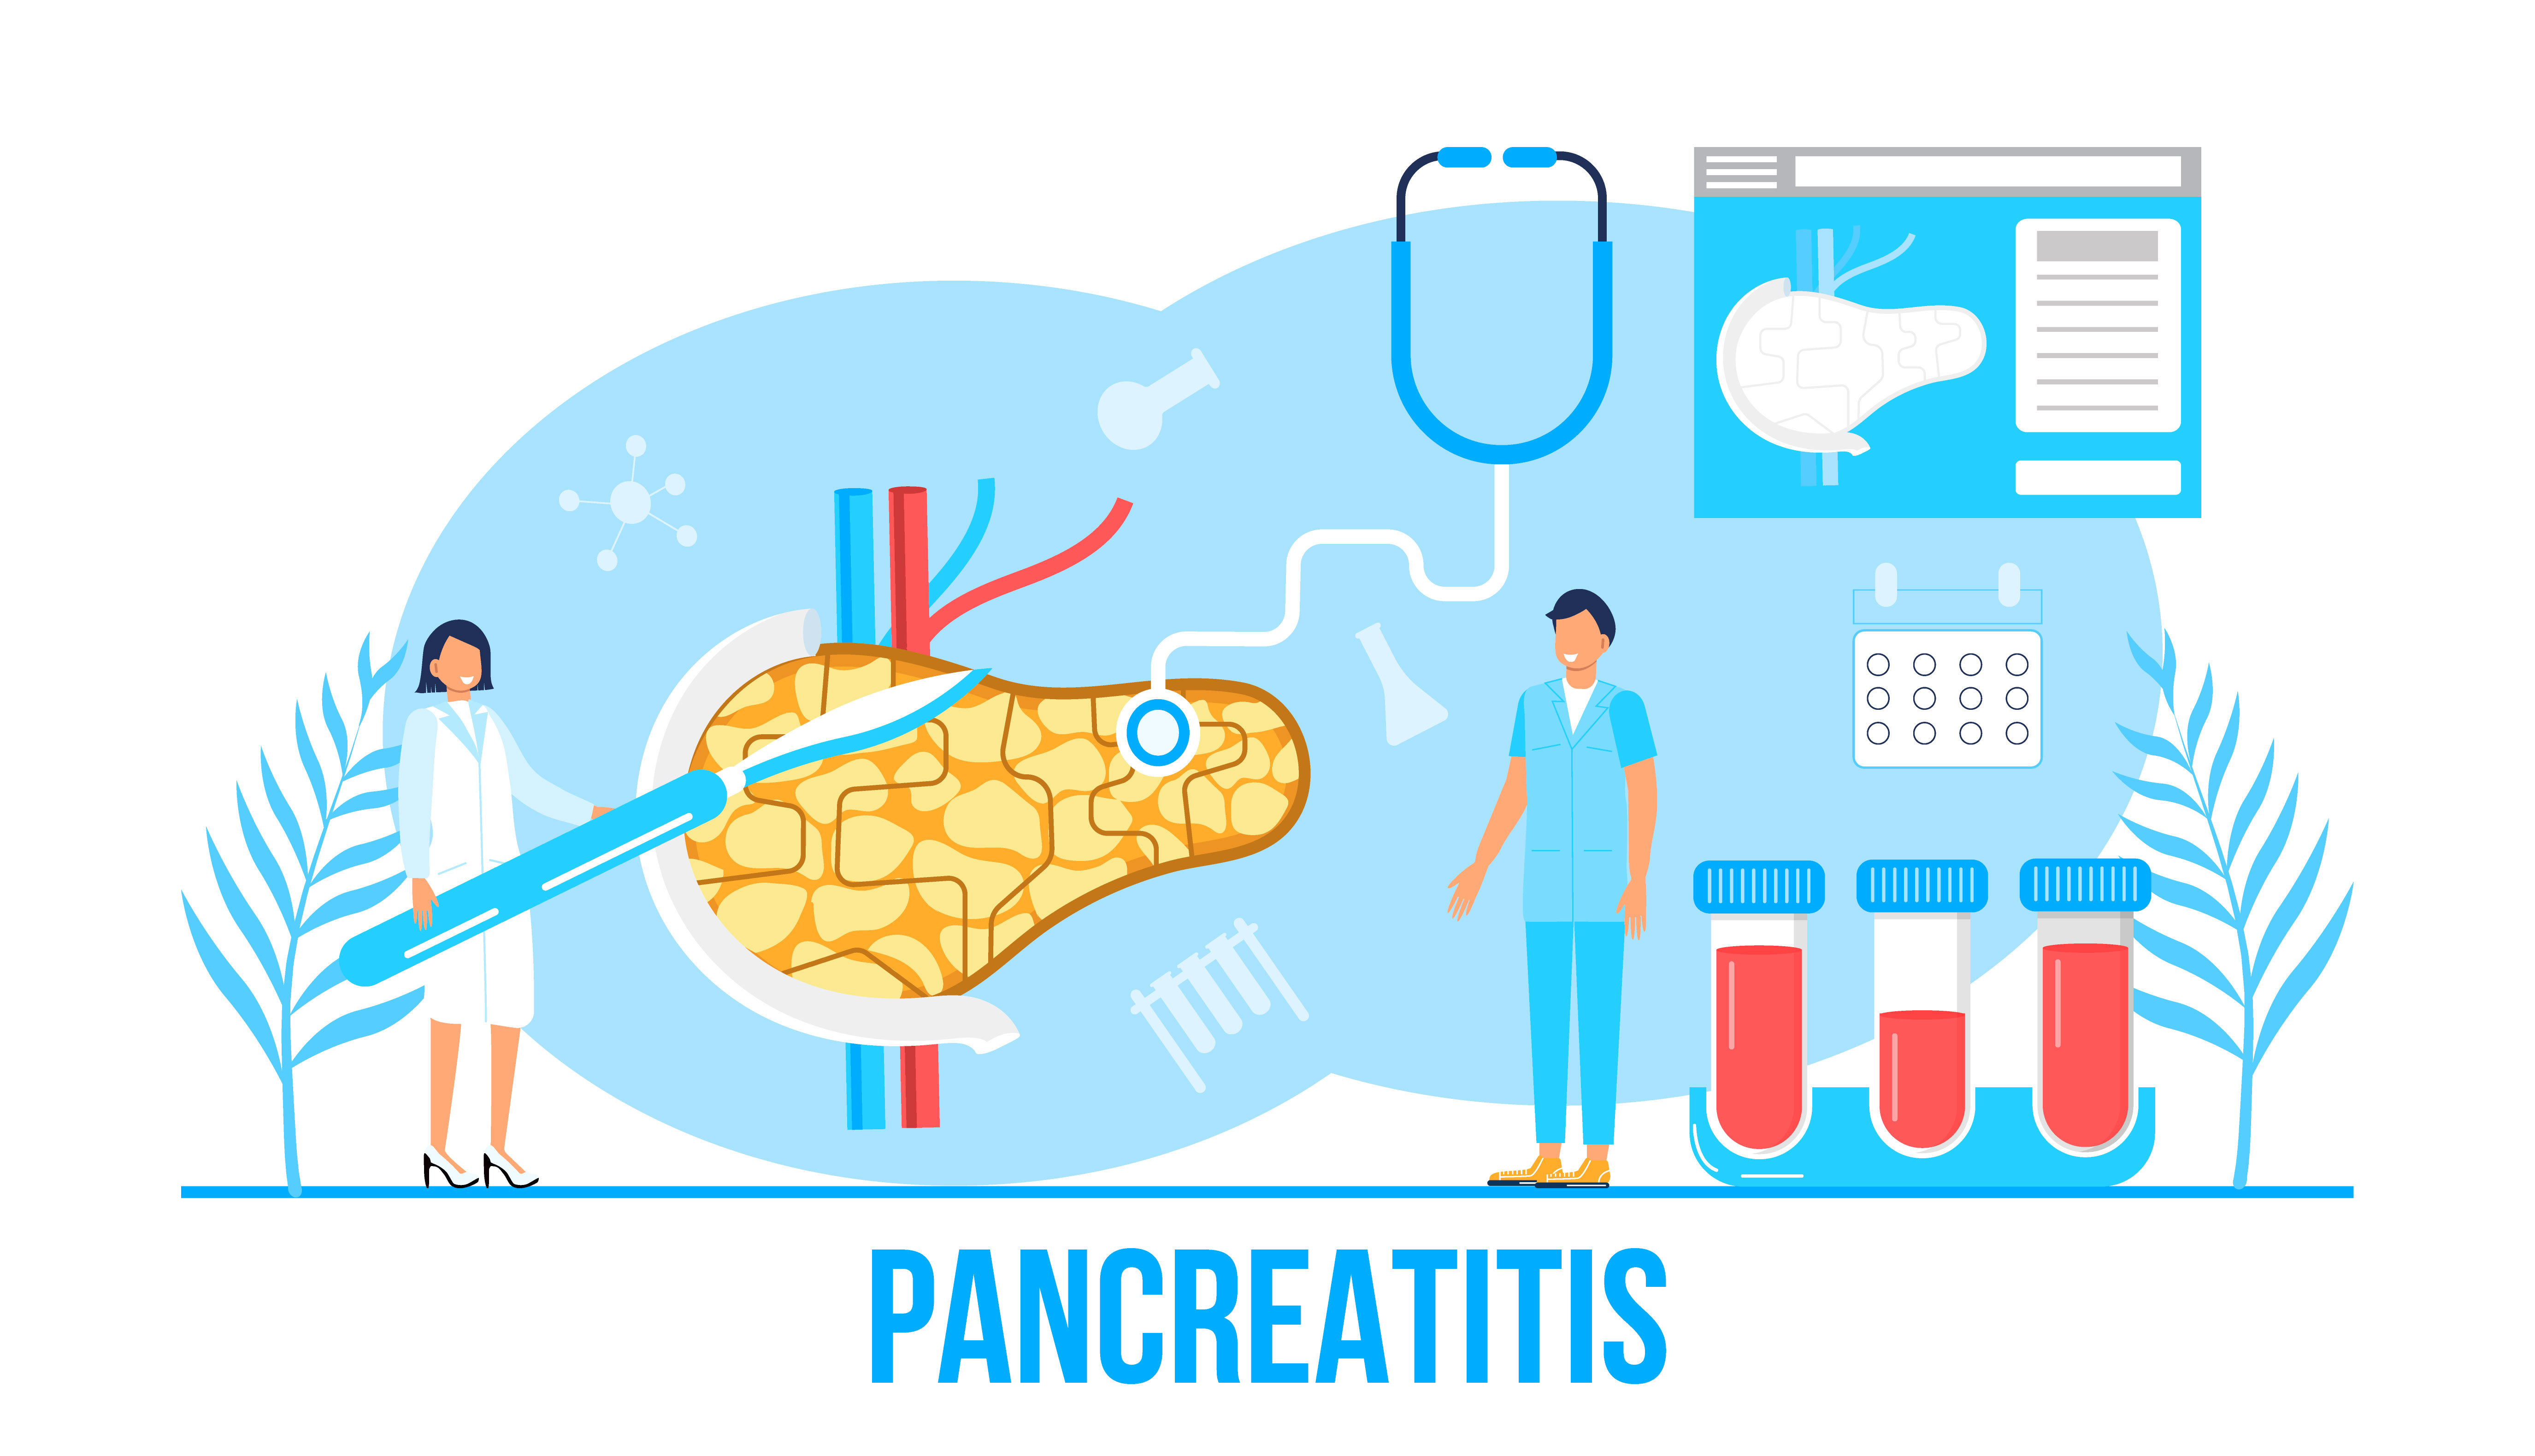 Pancreatitis concept vector. Pancreas doctors examine. Tiny therapist looks through a magnifying glass at internal organ. Health care concept in flat style for landing page, website, app, banner.. Pancreatitis concept vector. Pancreas doctors examine. Tiny therapist looks through a magnifying glass at internal organ. Health care concept in flat style for landing page, website